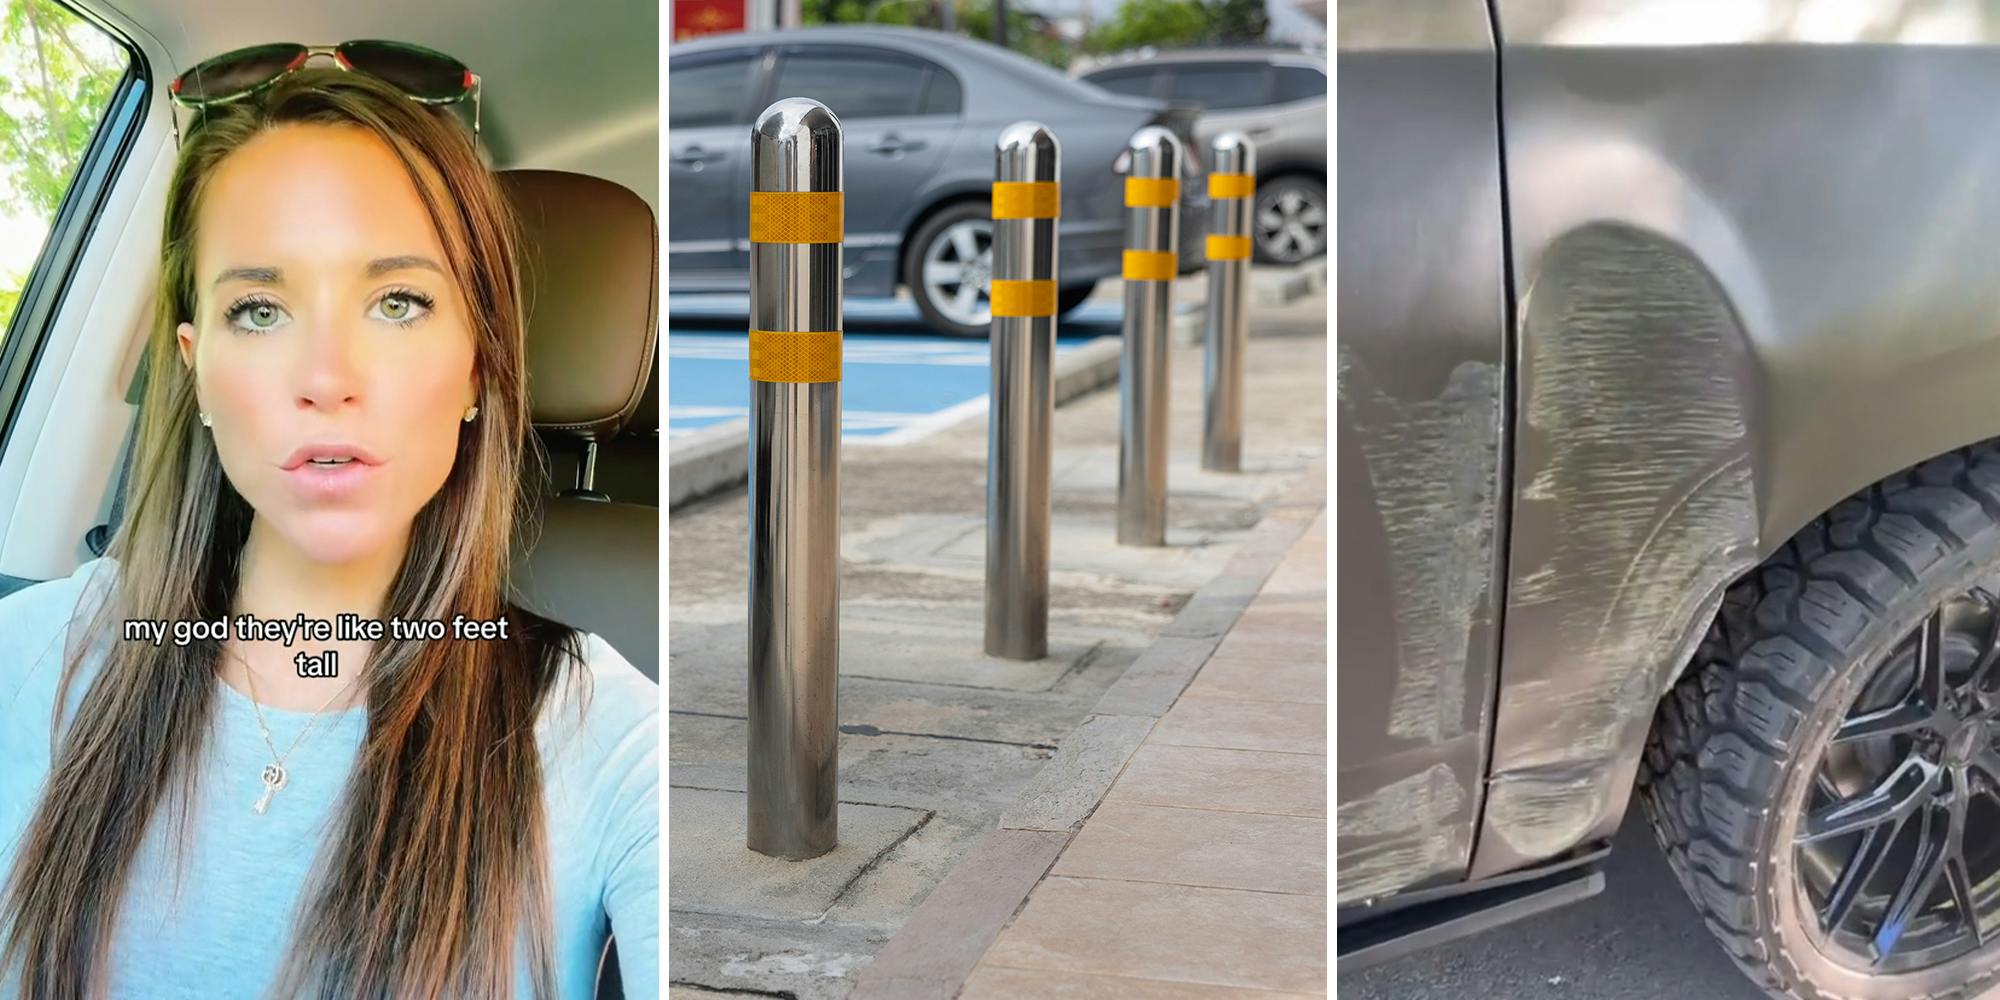 ‘That’s literally what they are for’: Viewers divided after woman blames bank for yellow poles causing $30,000 worth of damage to her car